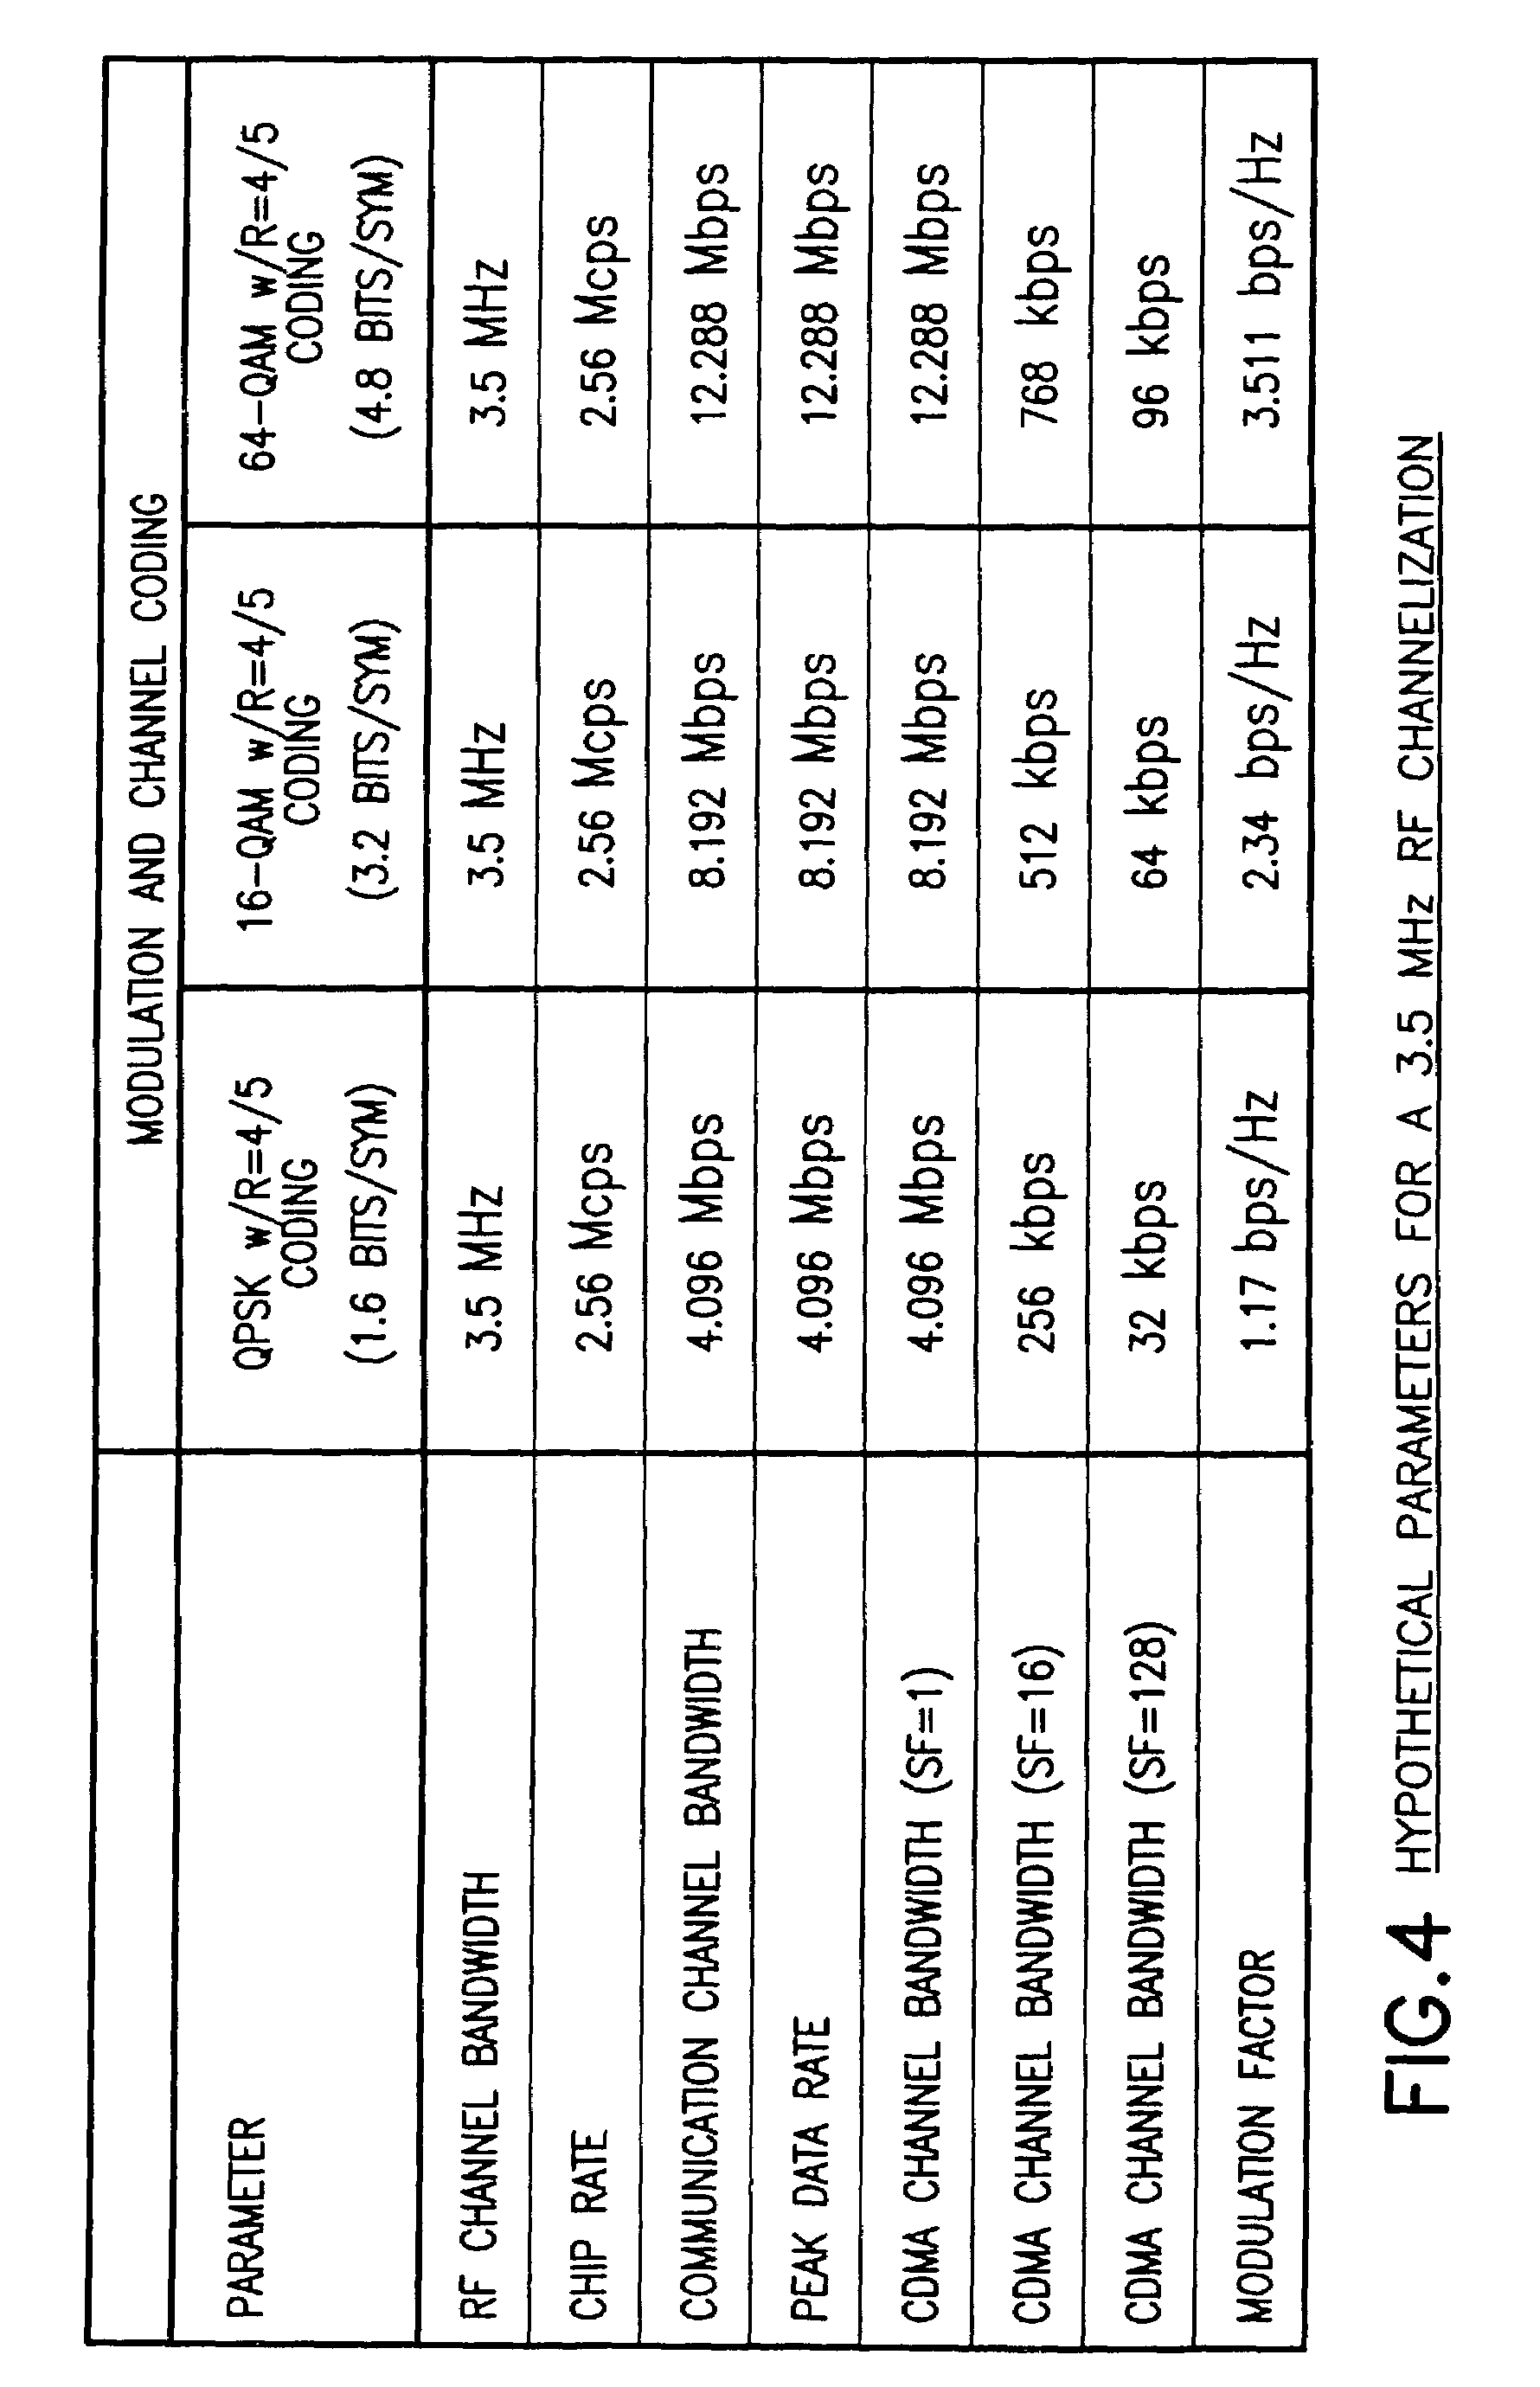 Use of chip repetition to produce a flexible bandwidth DS-CDMA system